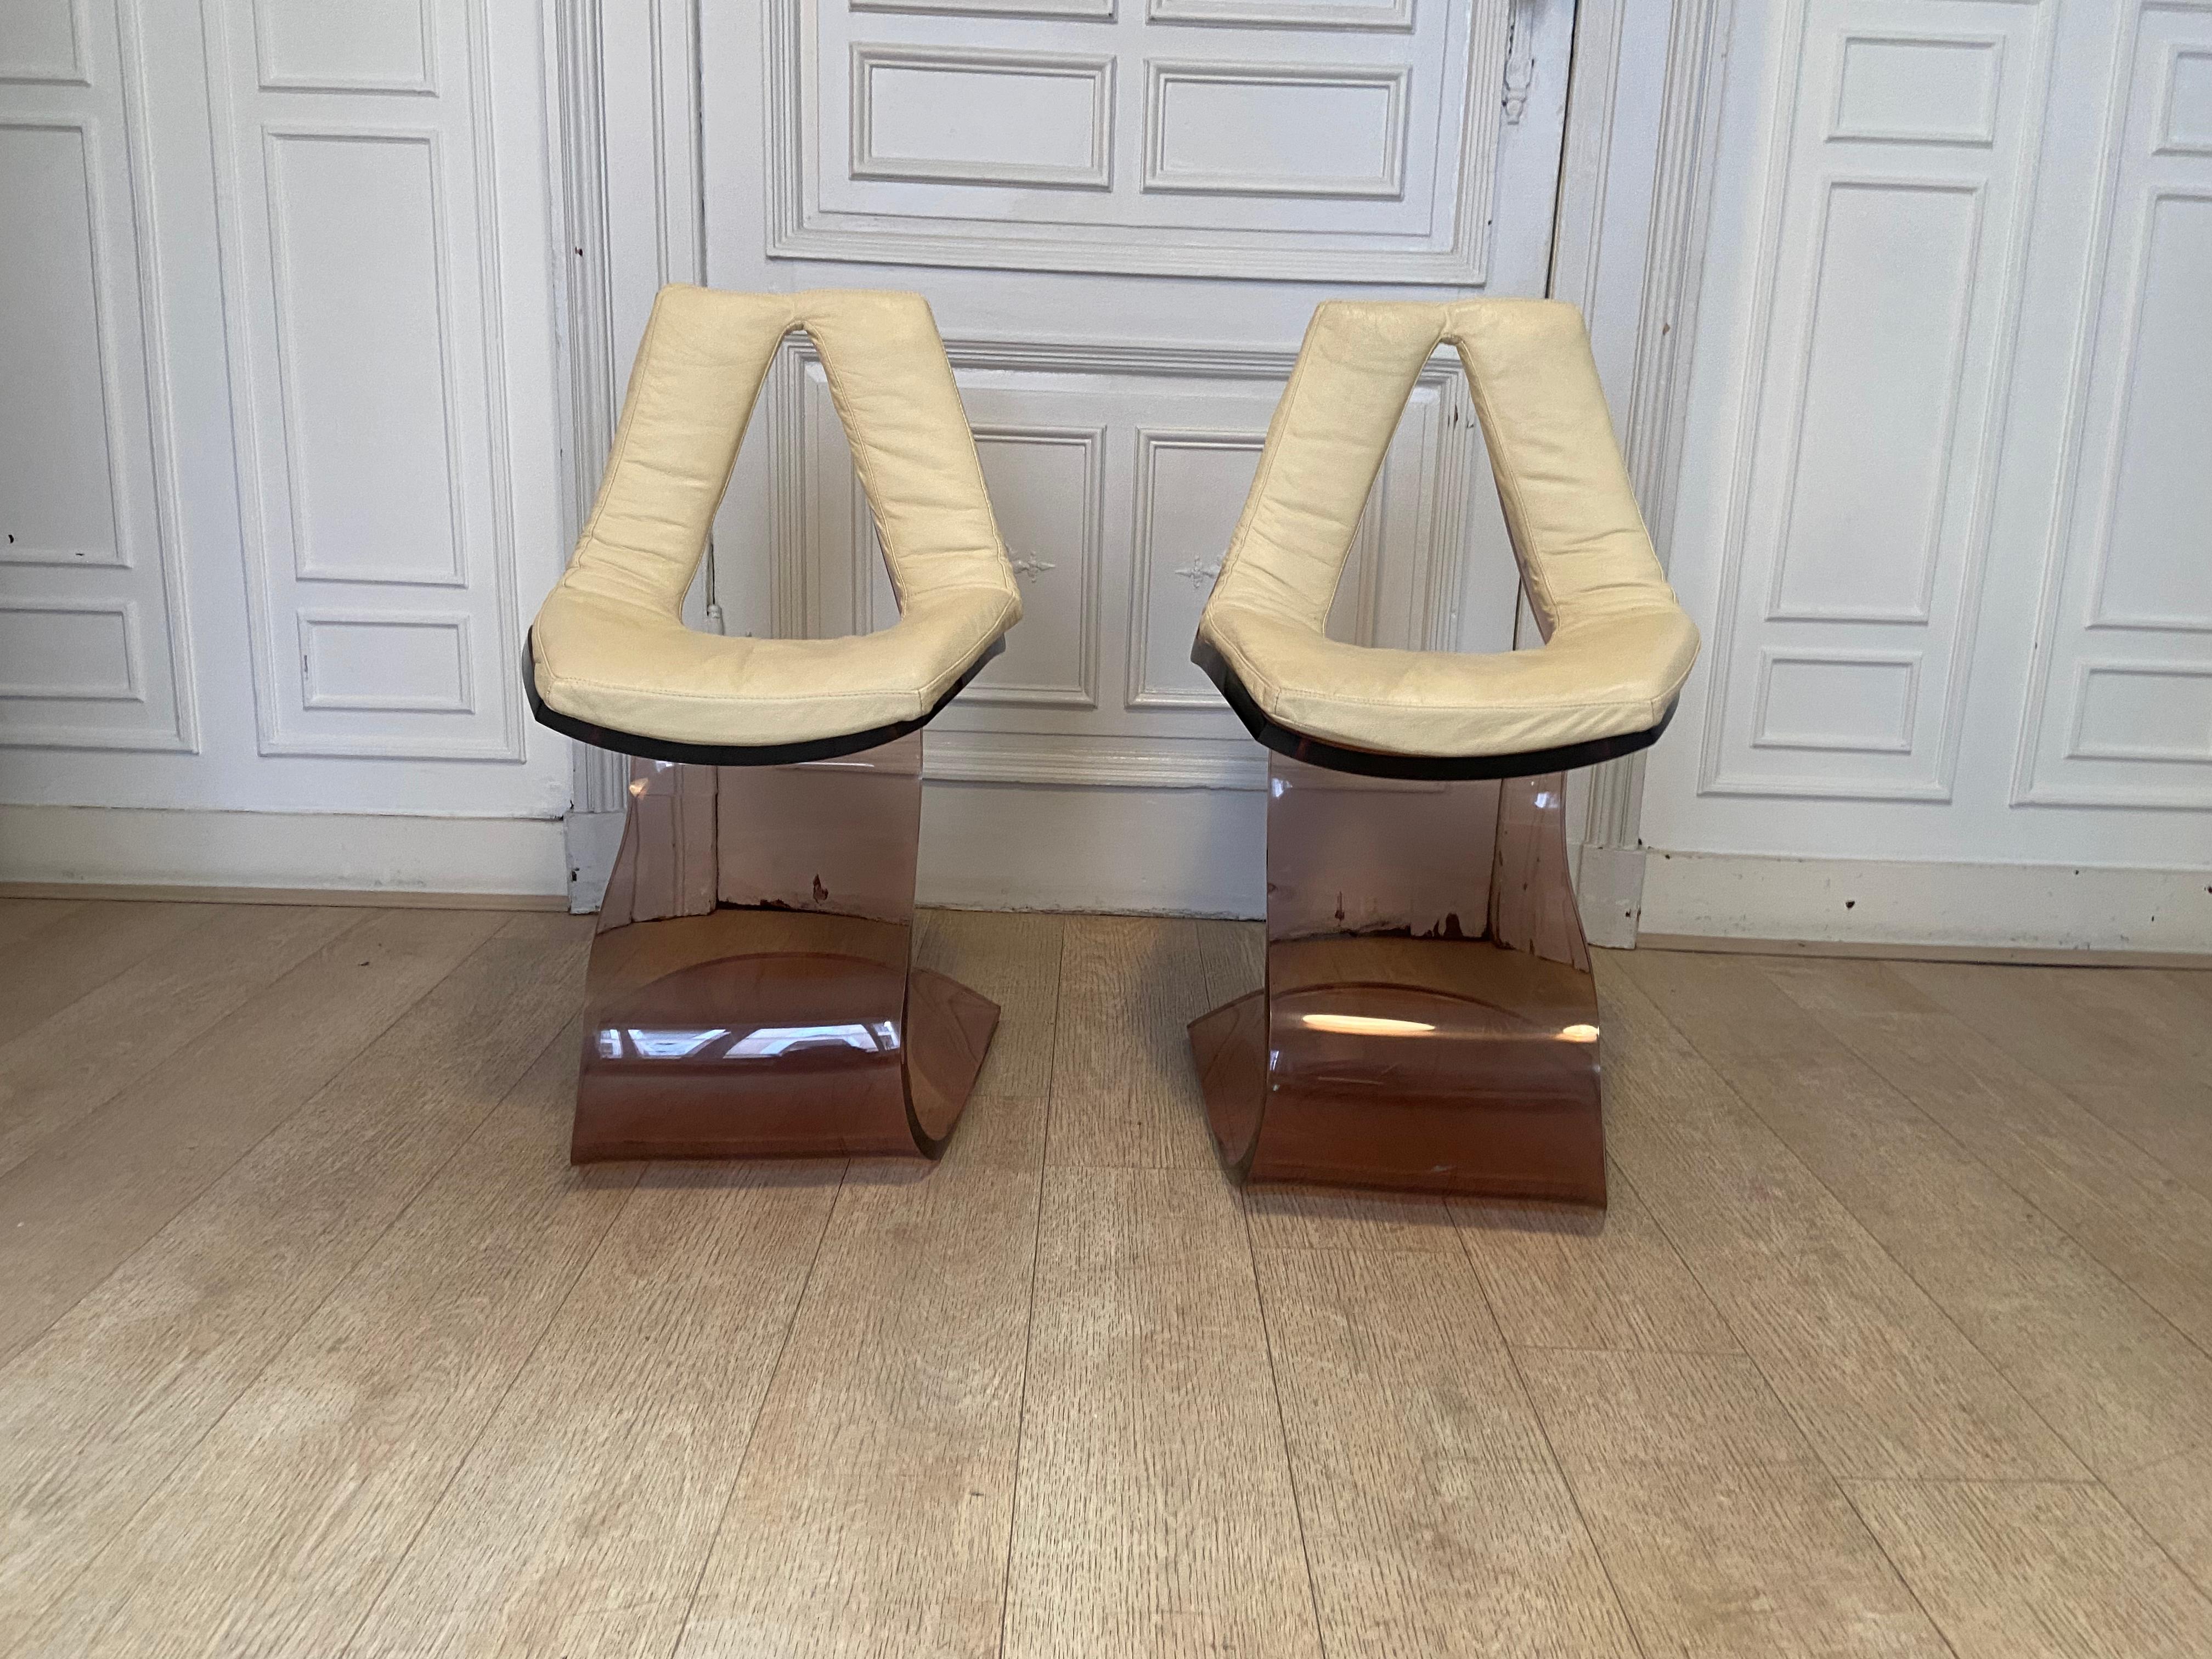 Michel Dumas Chairs, Plexiglass, 1970s In Good Condition For Sale In Brussels , BE